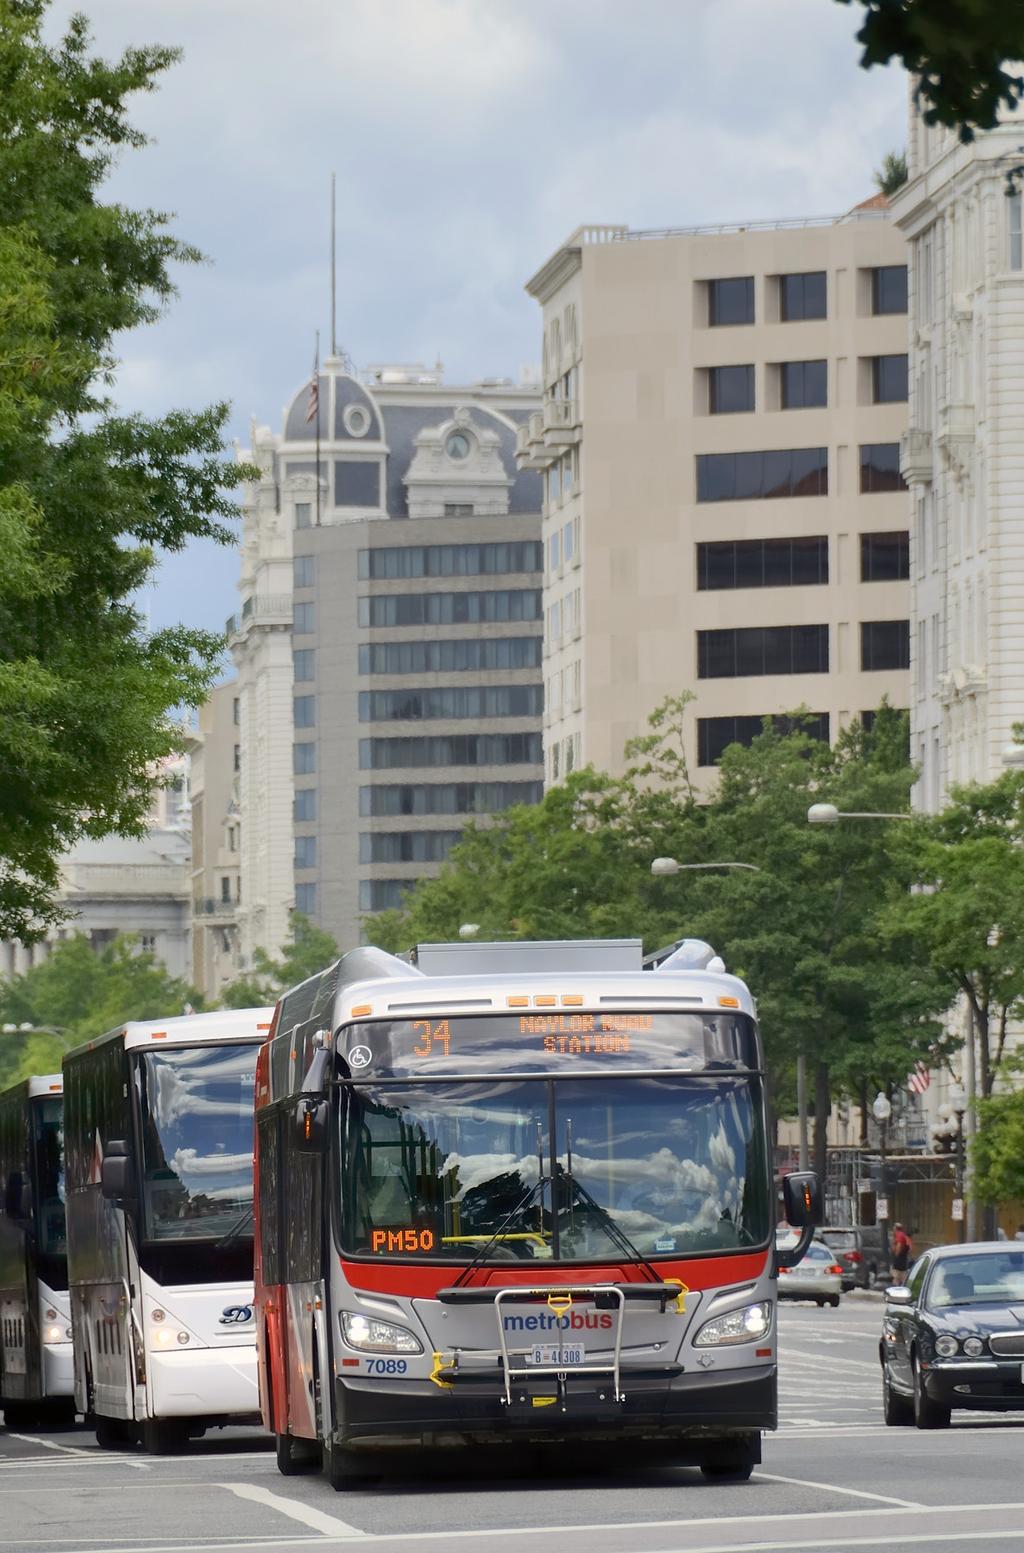 Priority Bus Transit in the Capital Region (Maryland, Virginia, and Washington, DC) was included in TIGER I and funded with $58 million.